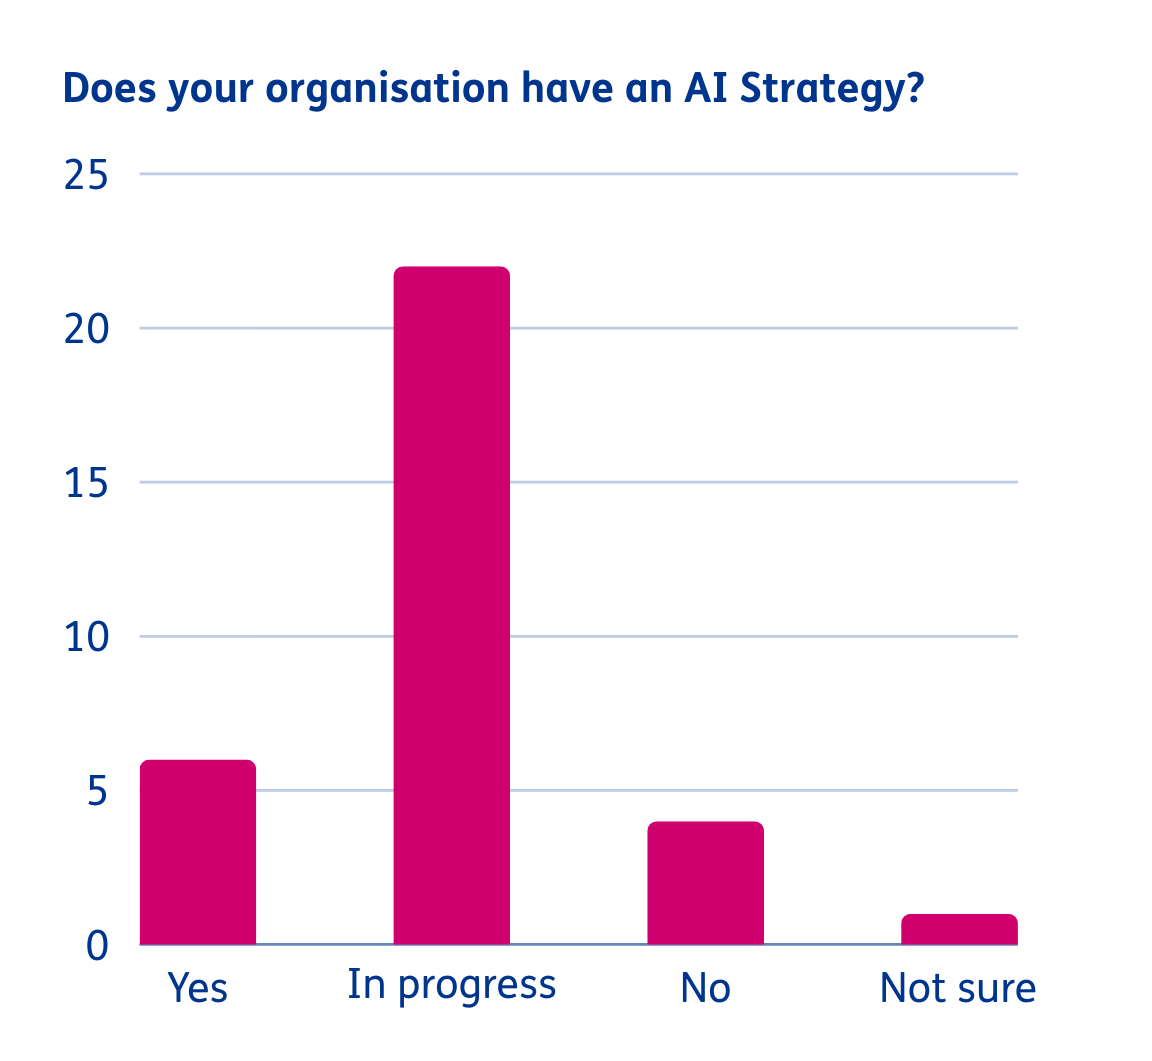 Does your organisation have an AI strategy?